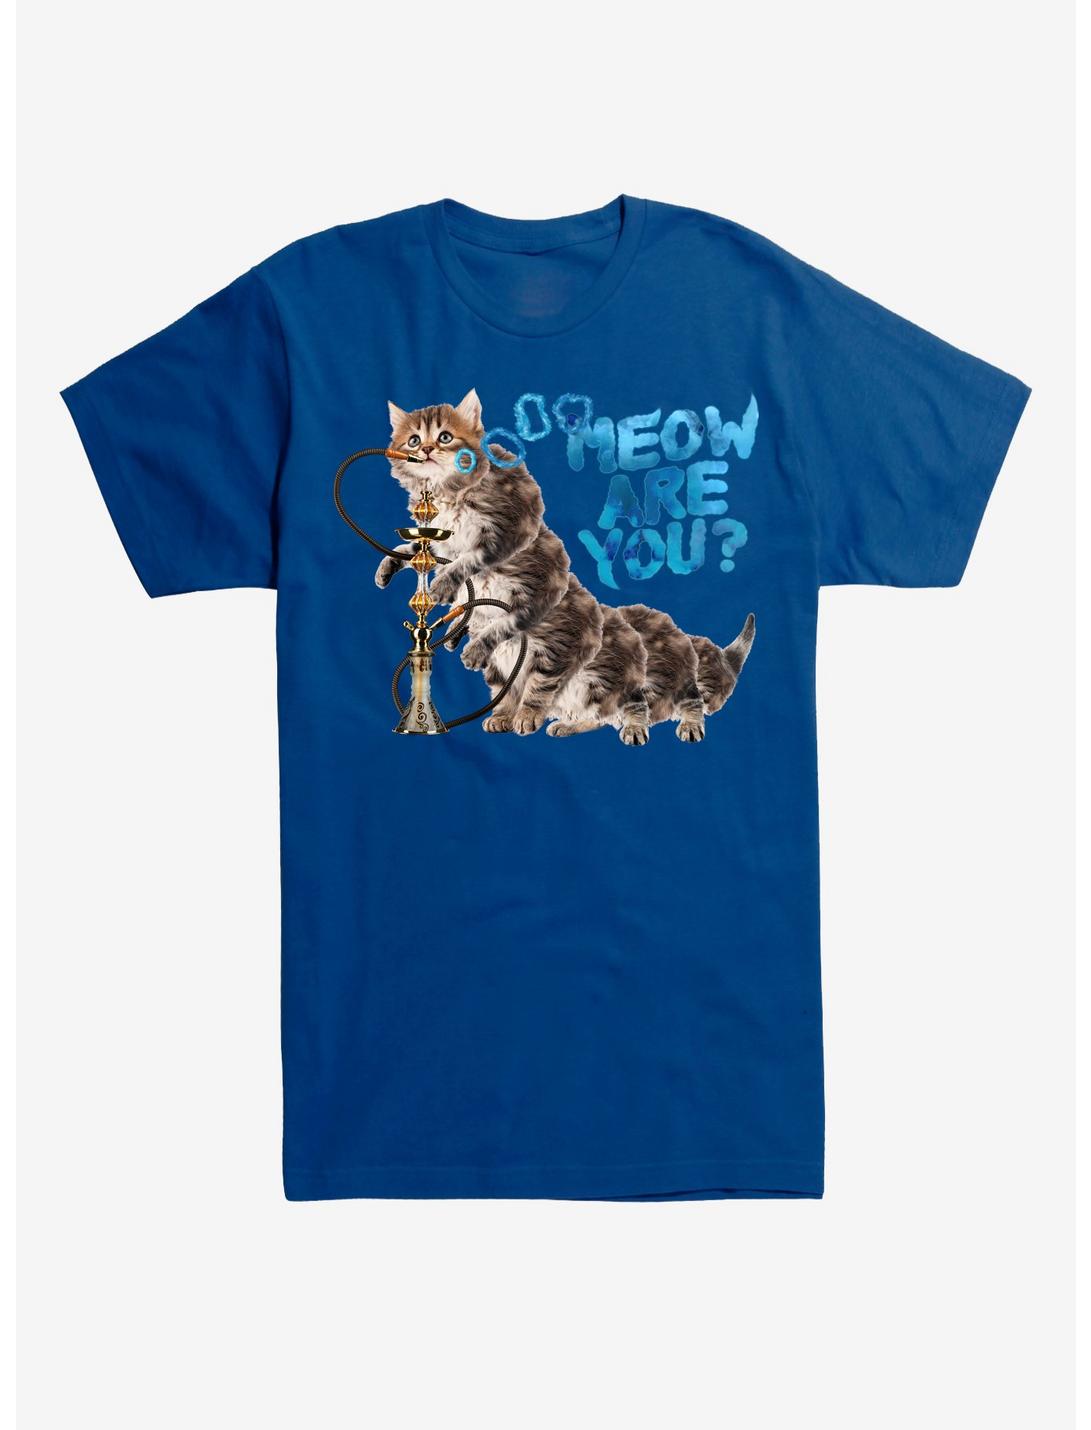 Meow Are You Cat T-Shirt, ROYAL BLUE, hi-res